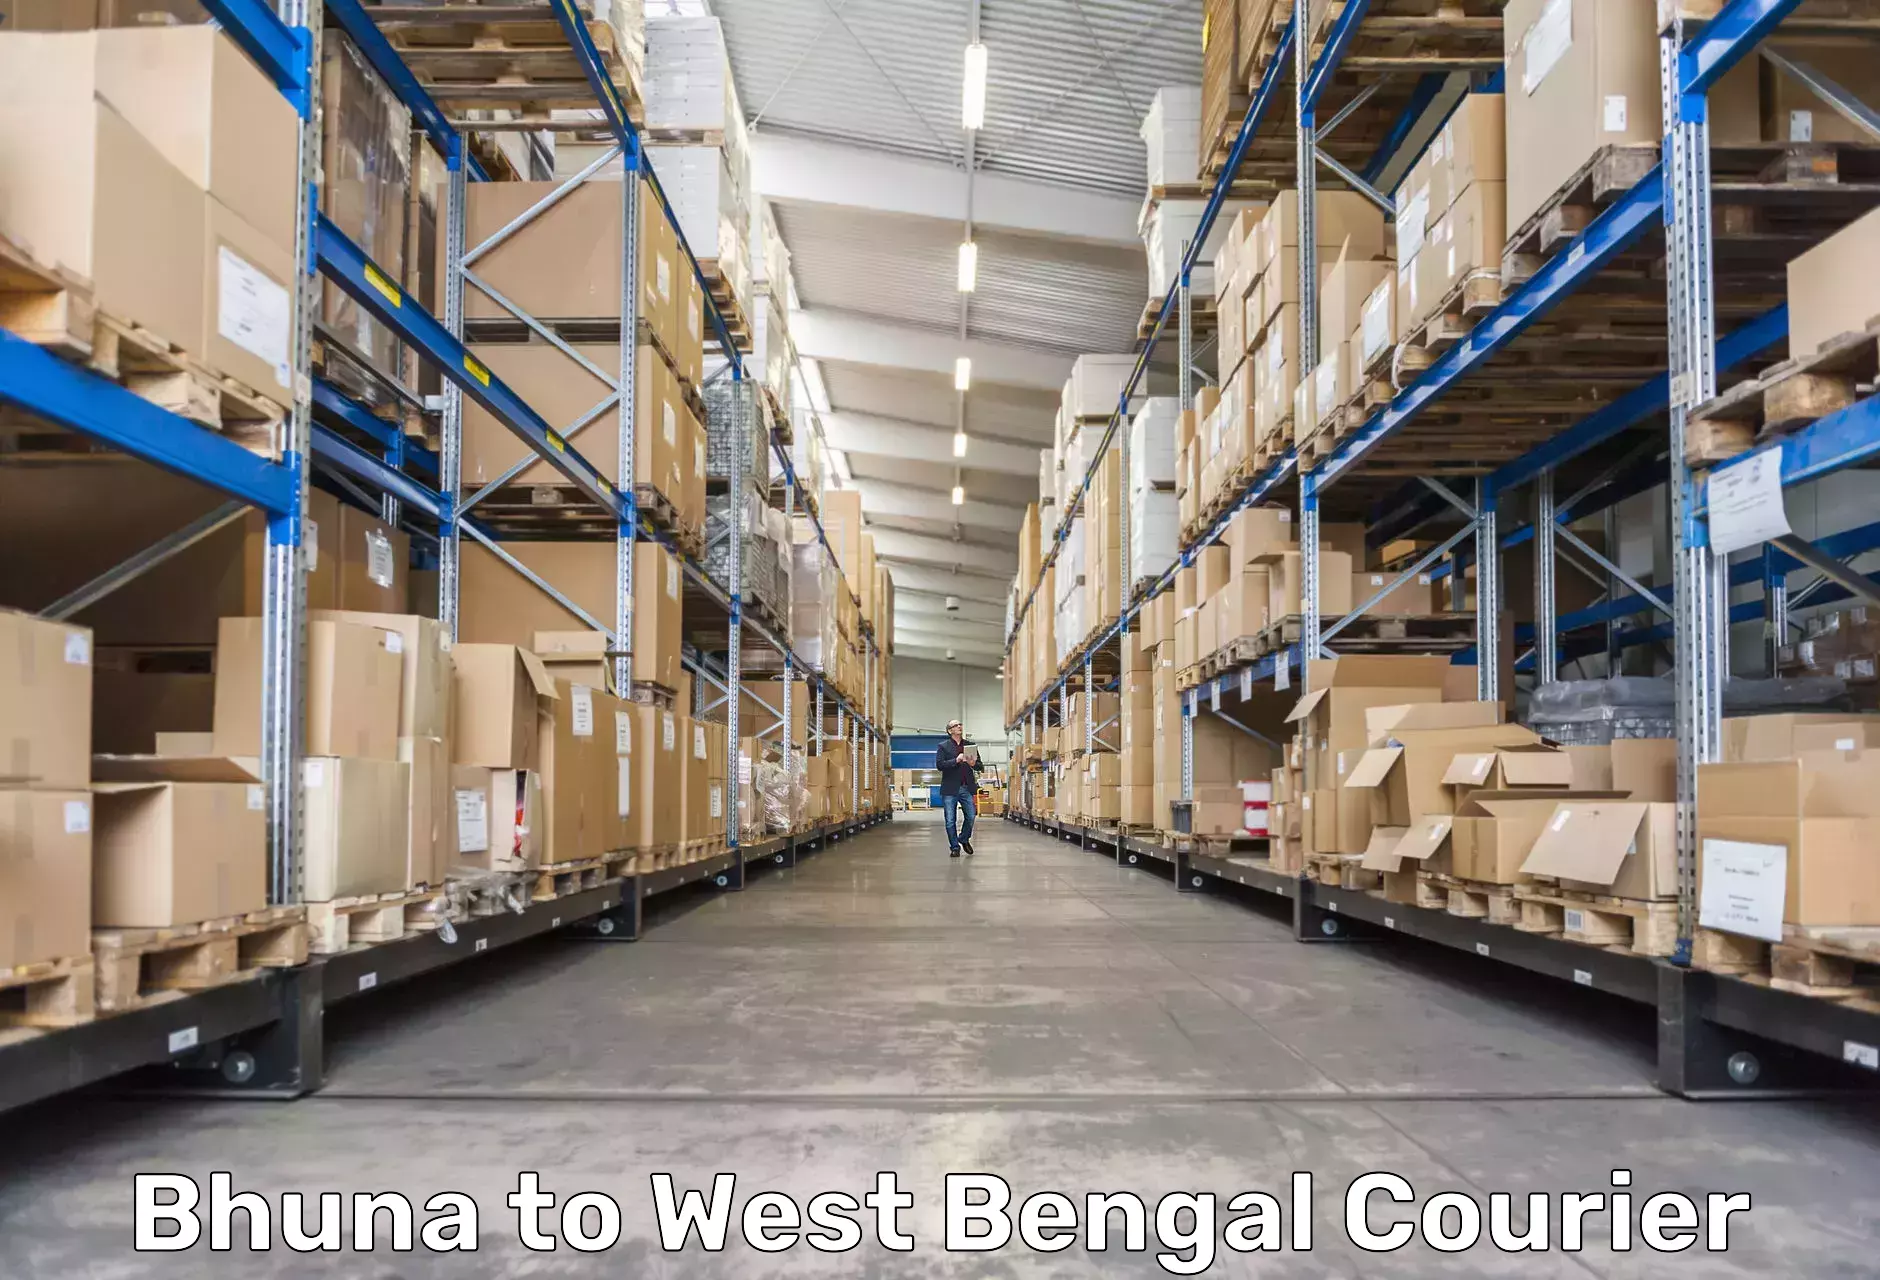 Delivery service partnership Bhuna to West Bengal